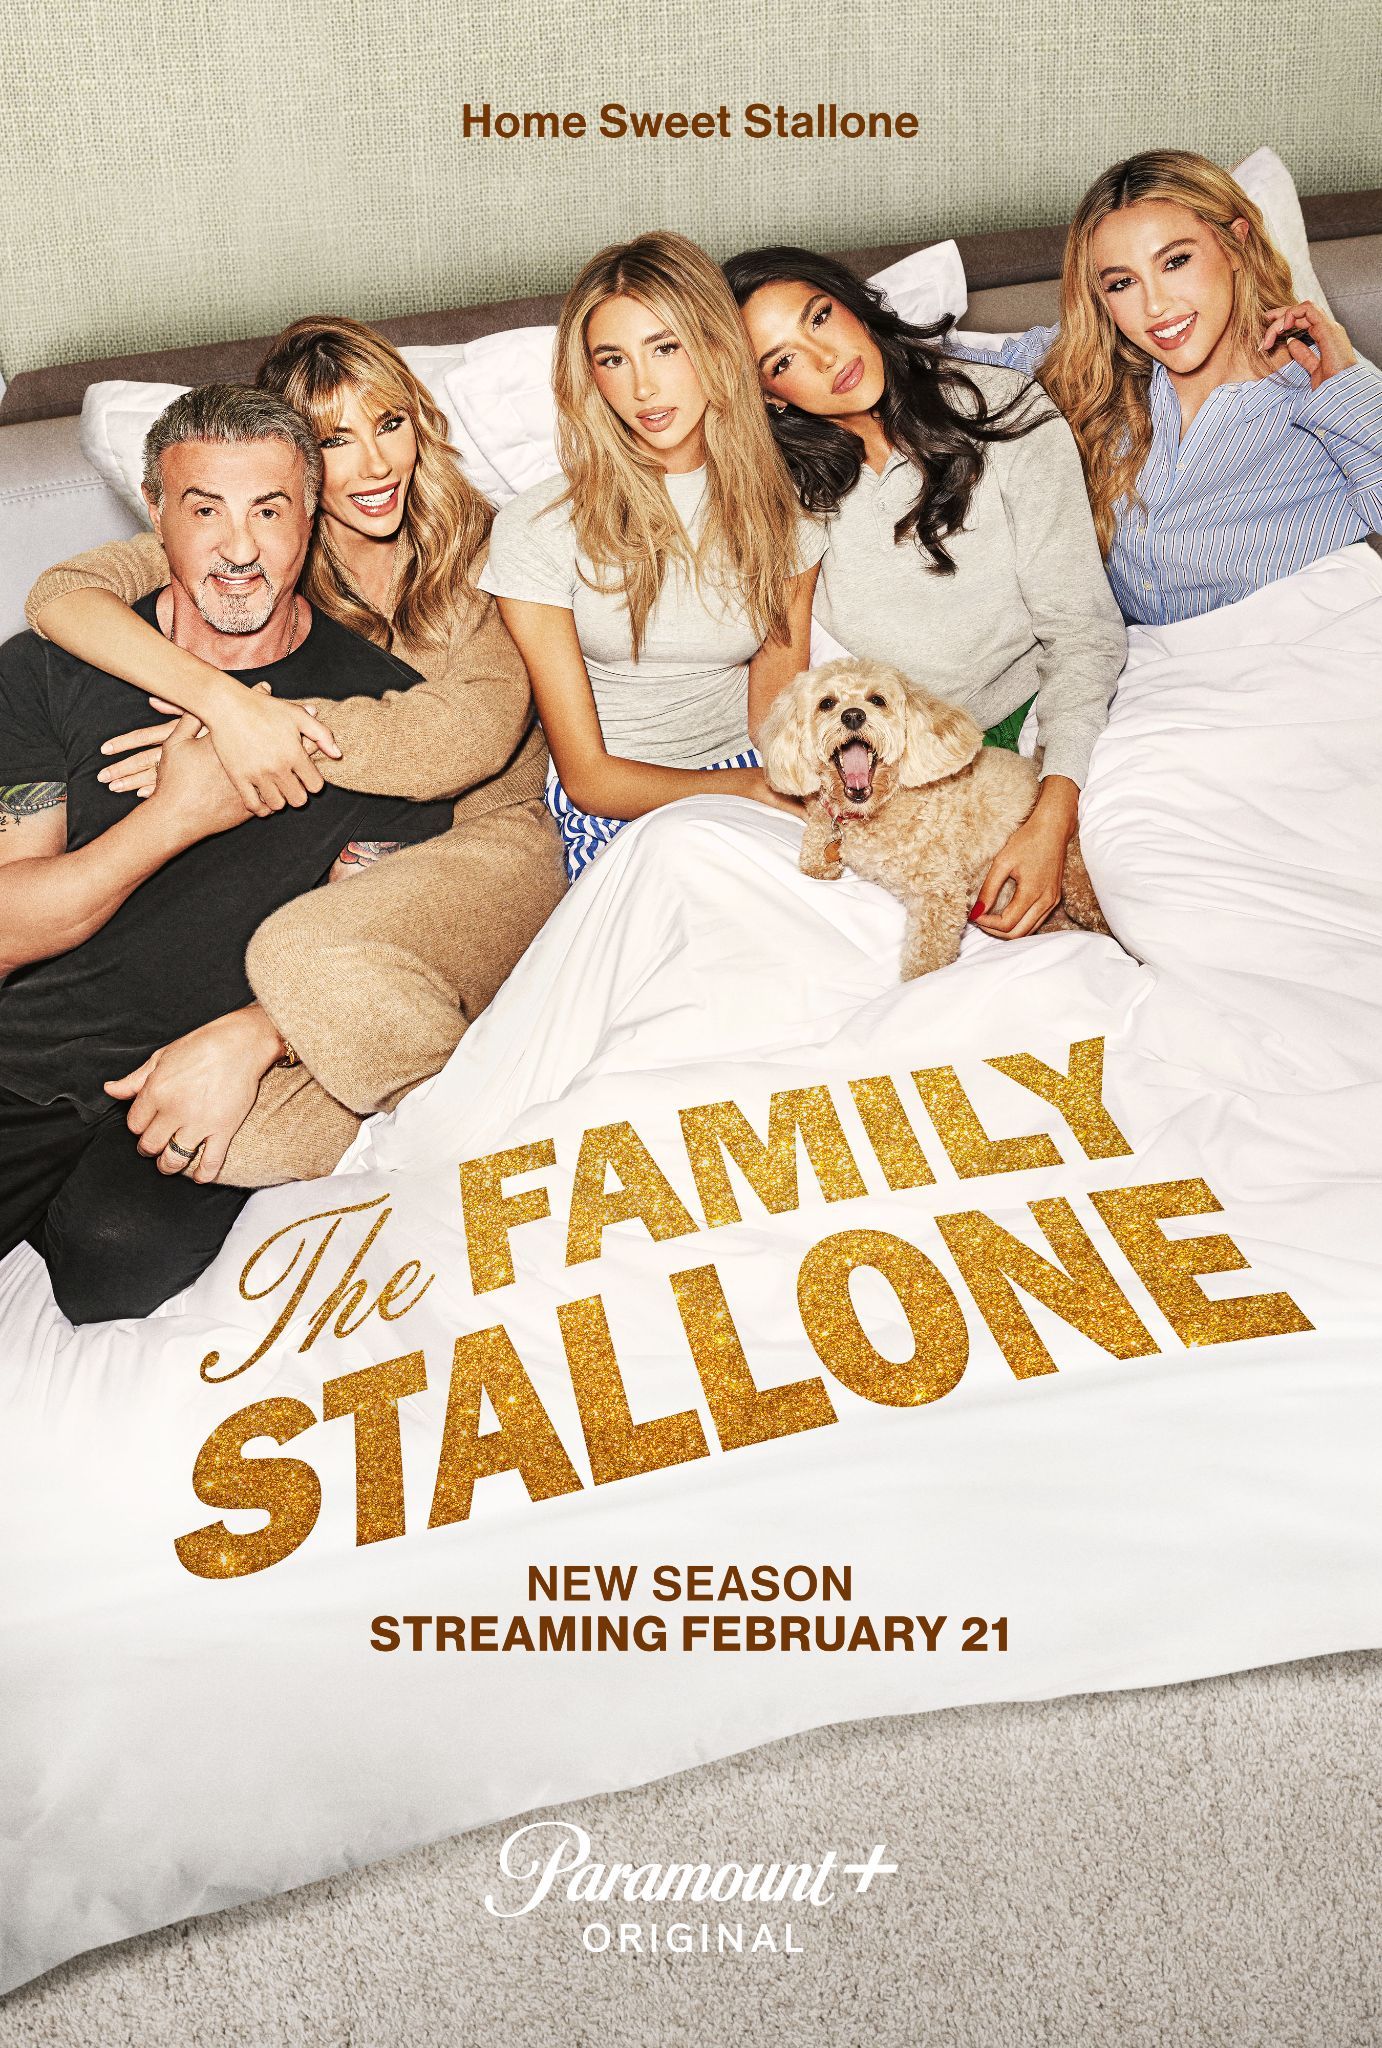 The whole Stallone family pilled in bed together on the poster for The Family Stallone Season 2